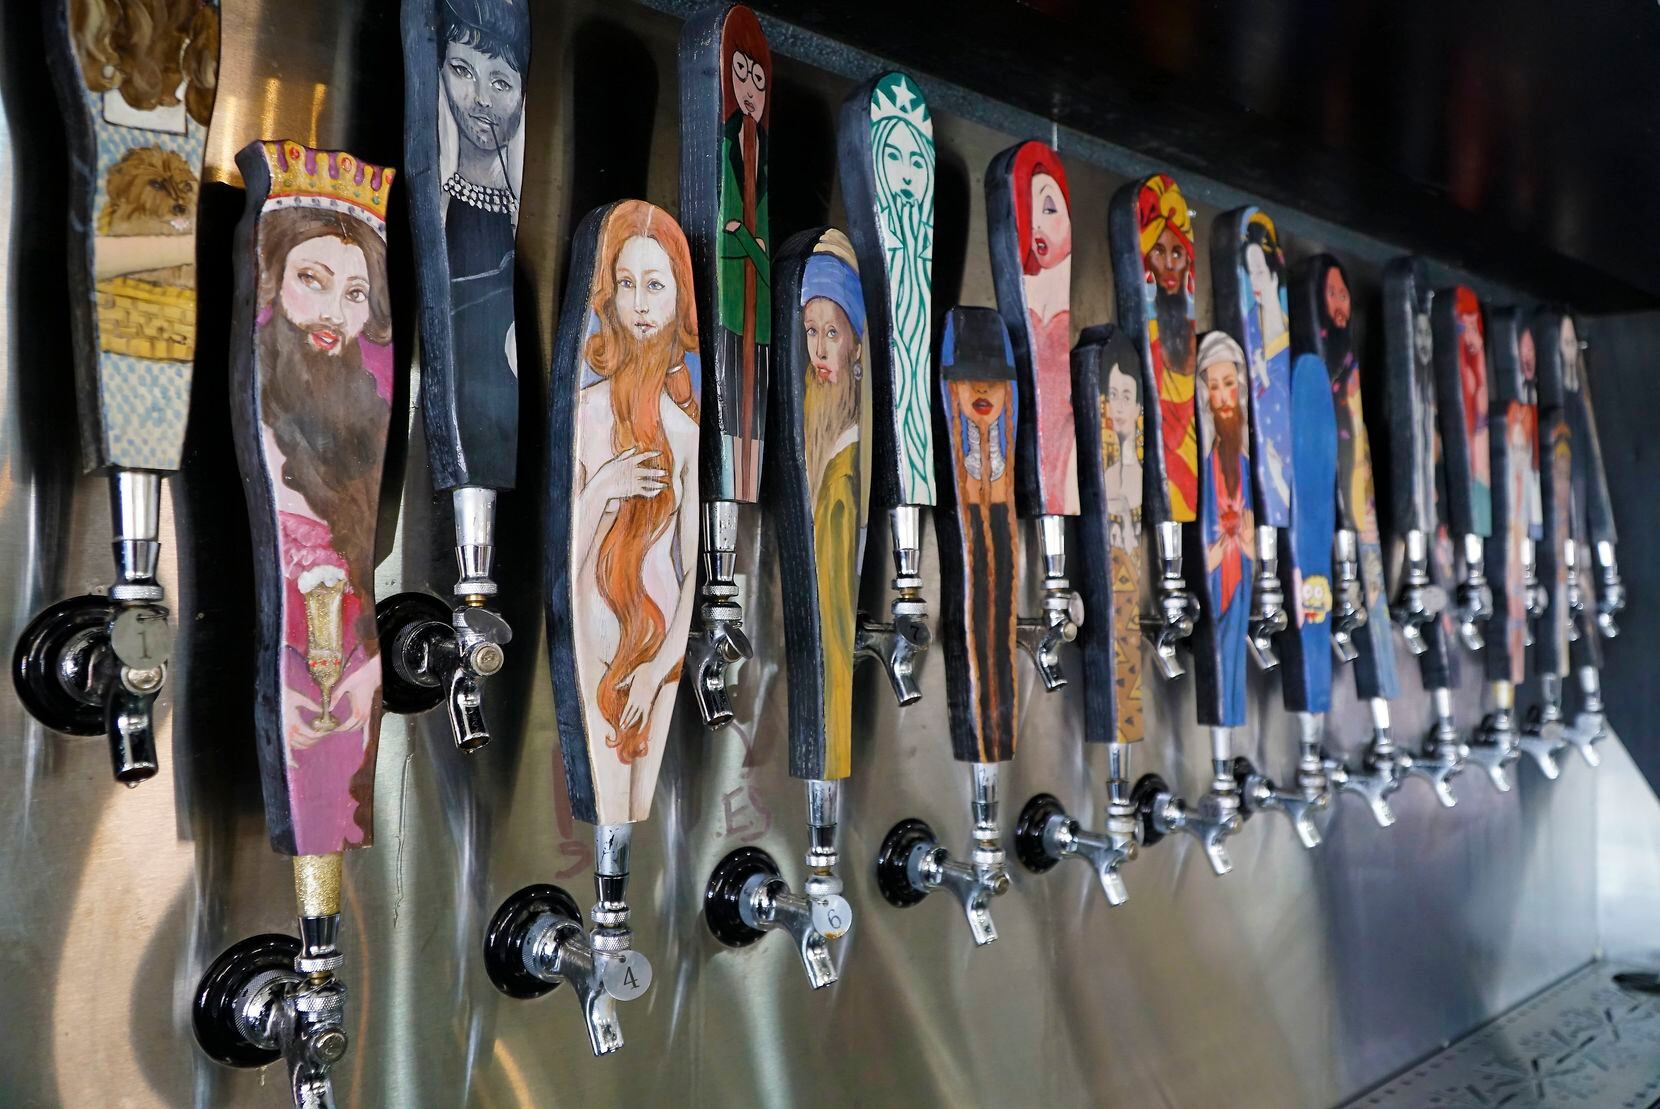 The beer taps are unique at The Bearded Lady Restaurant in Fort Worth.